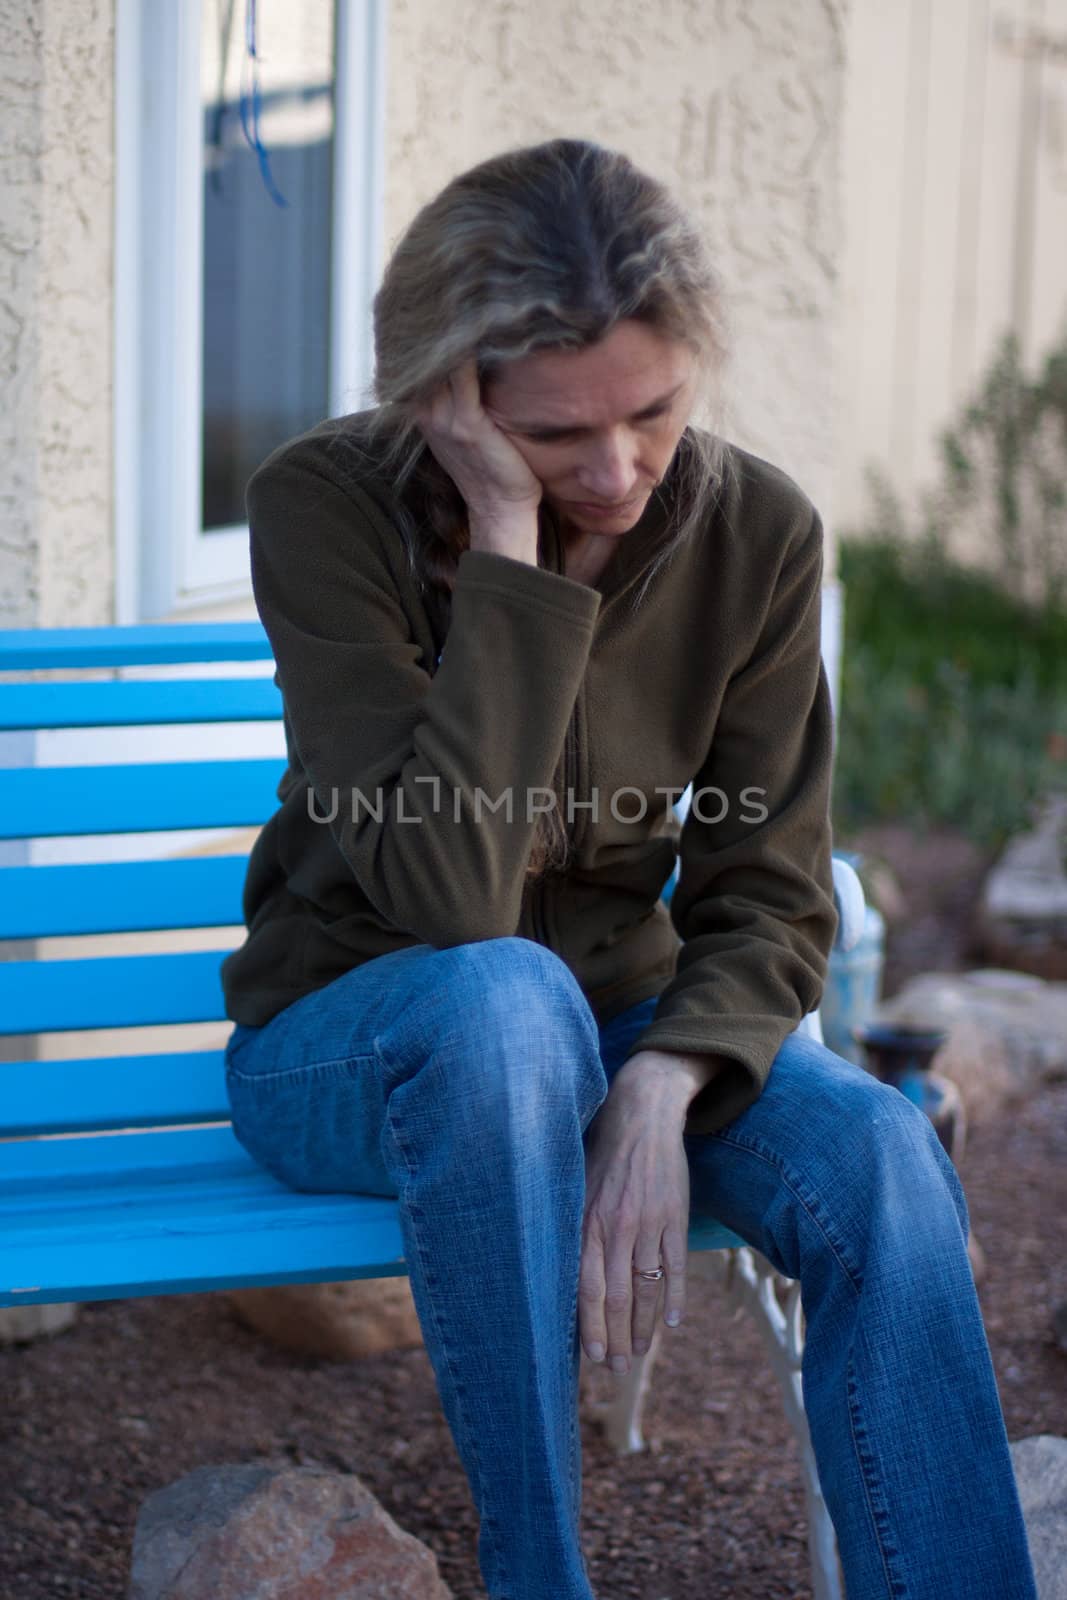 Woman sitting on bench depressed and frustrated